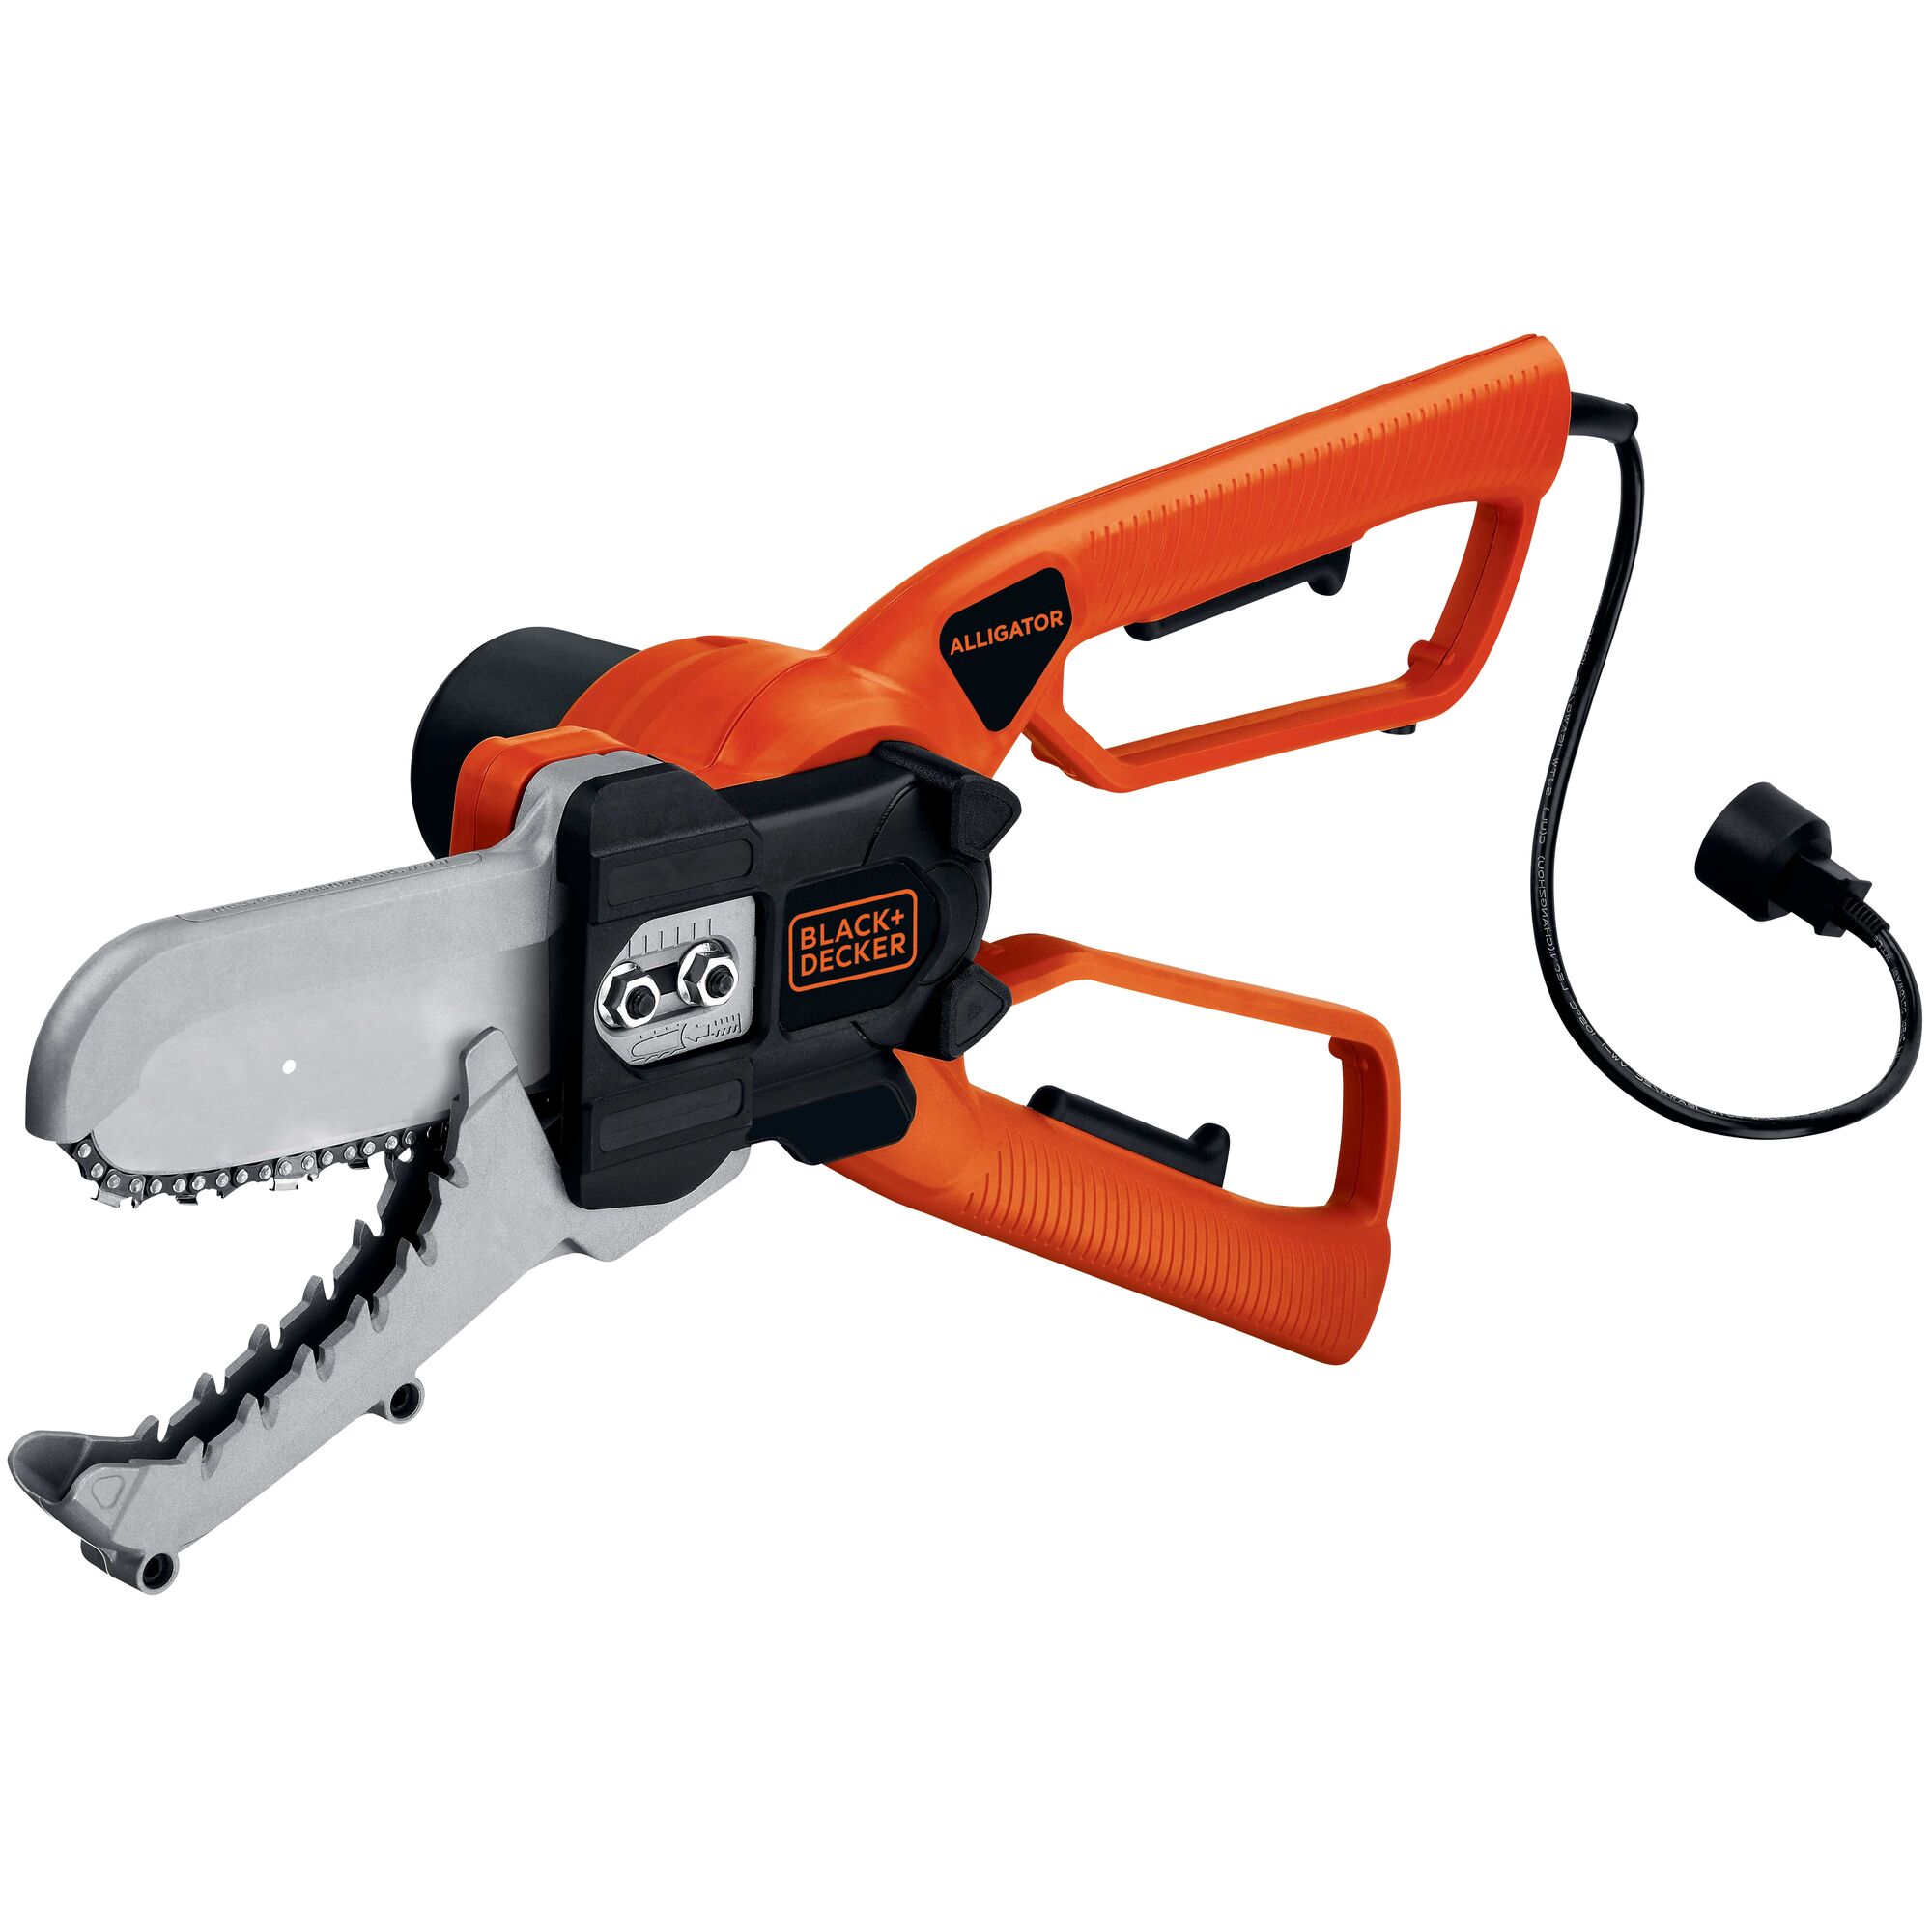 Electric Outdoor Lopper on white background.